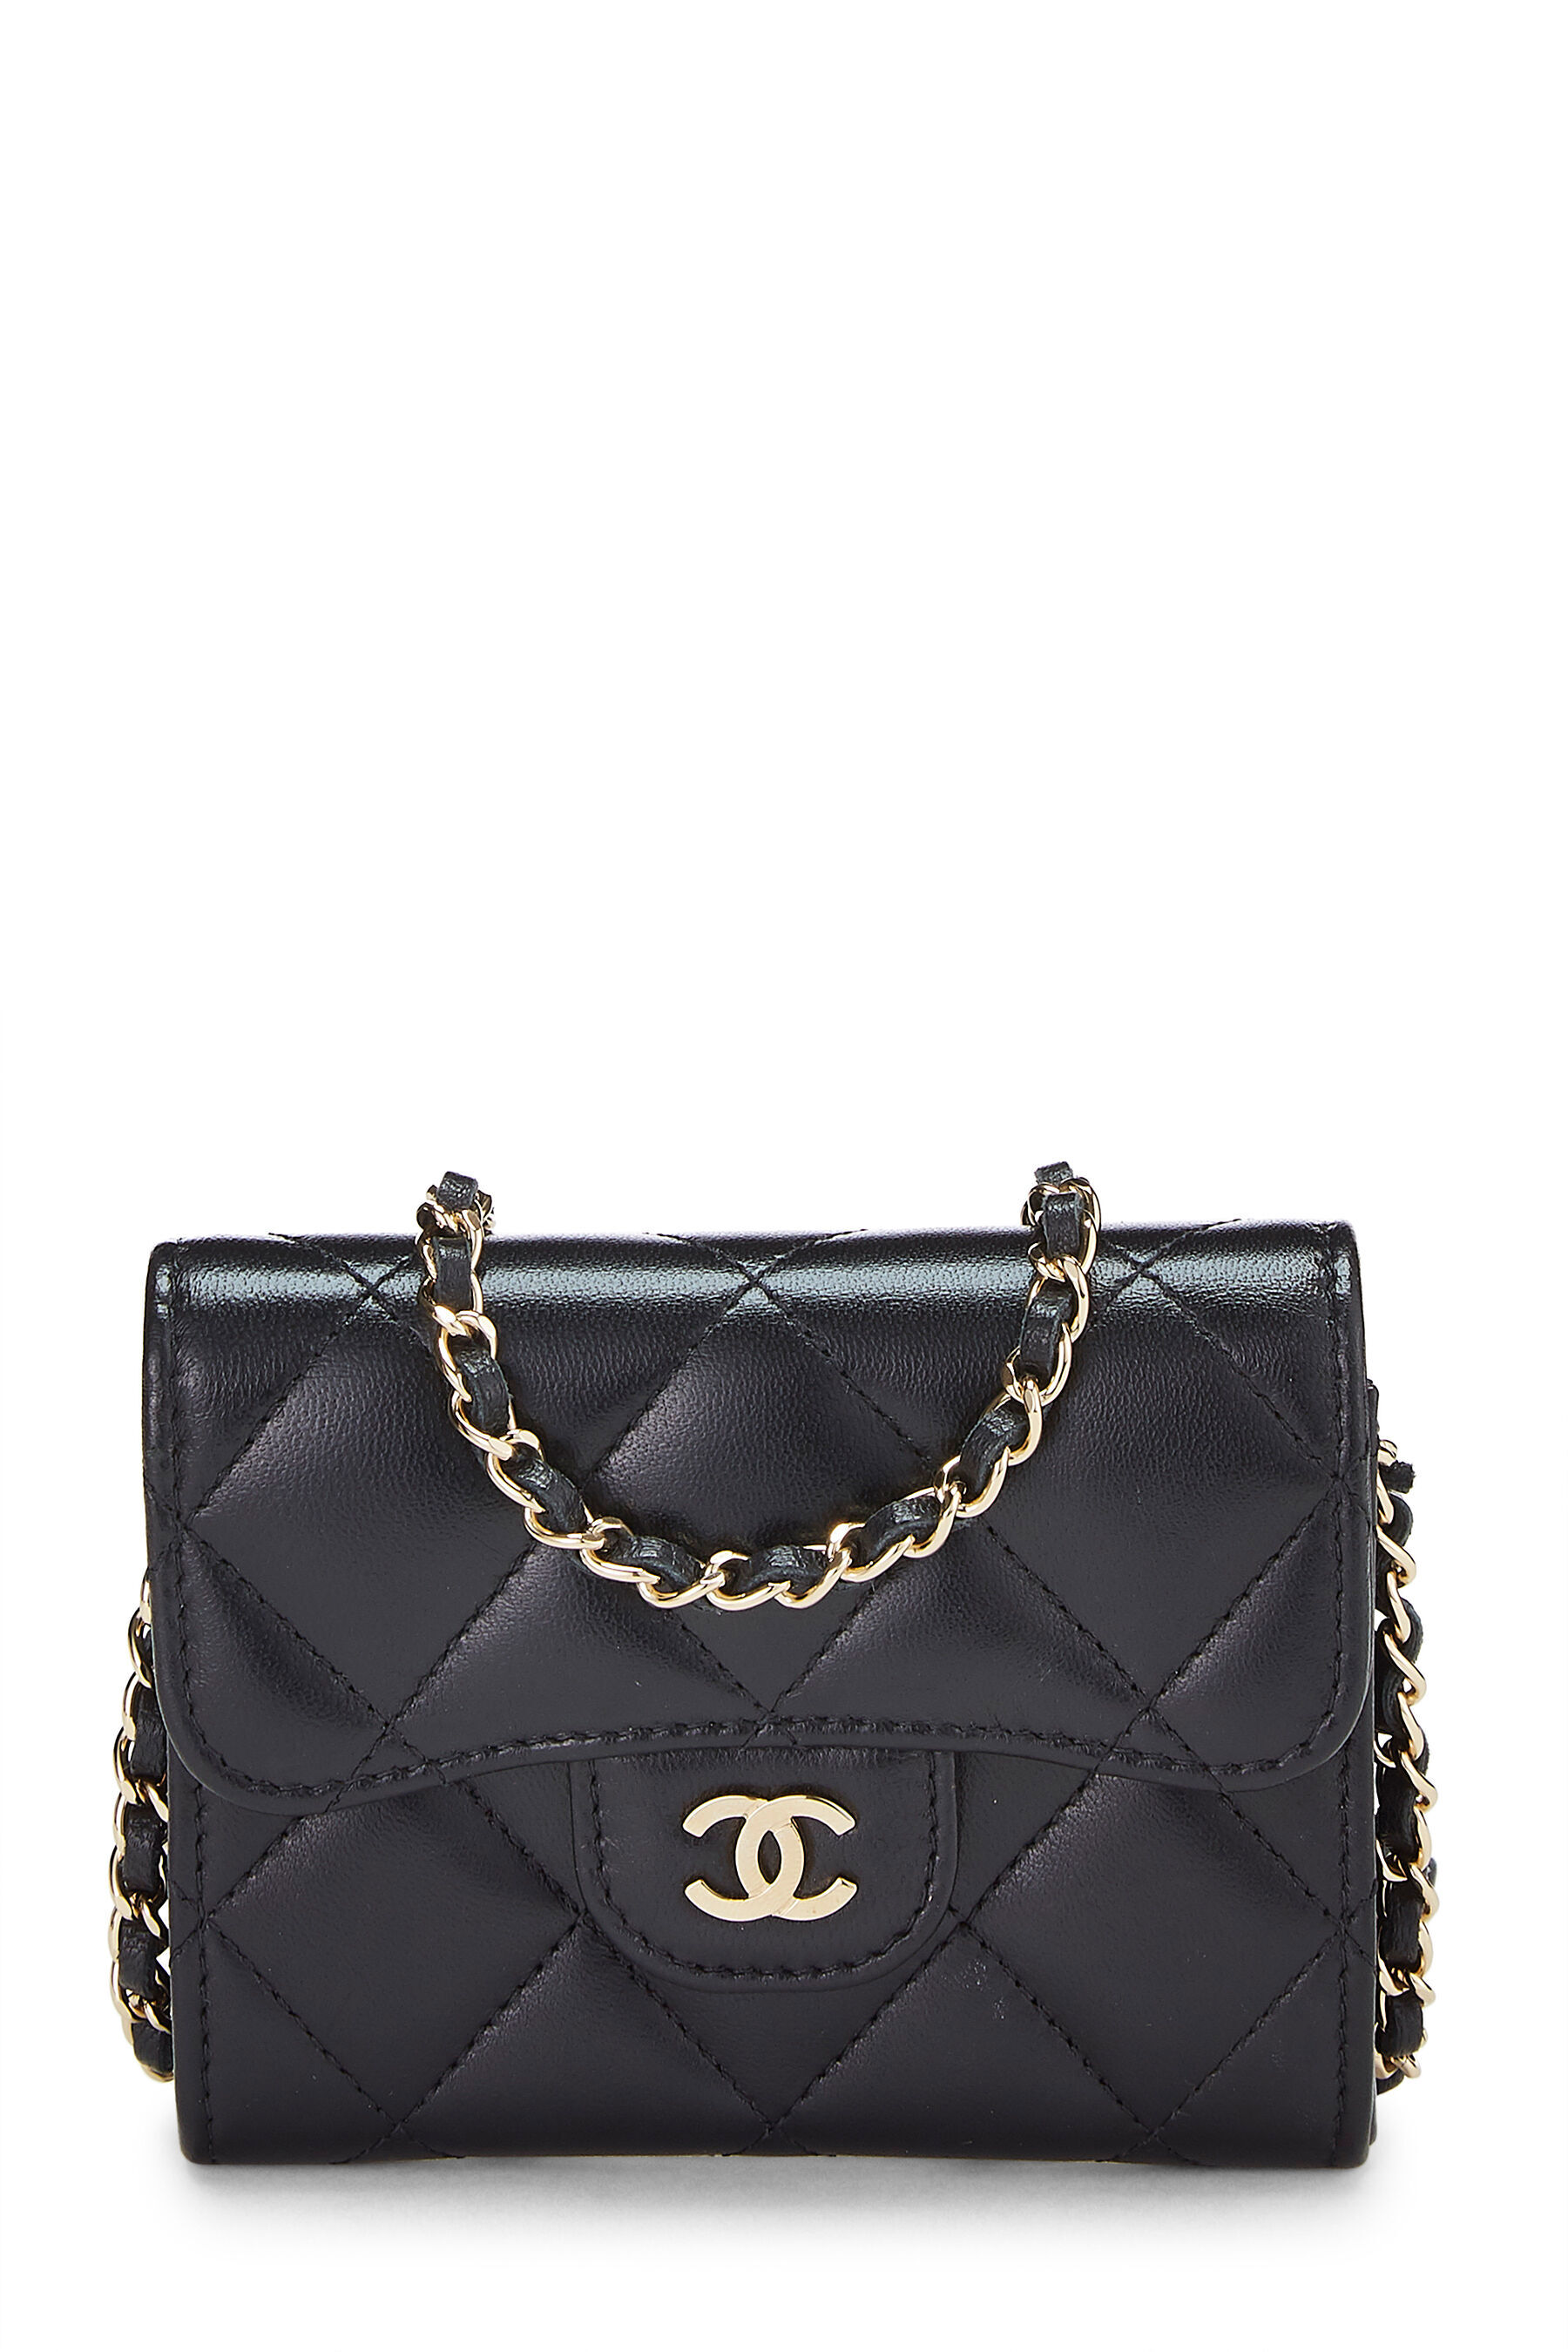 CHANEL Vintage Black Quilted Patent Leather Square Flap Bag XL Gold Logo CC  HW | eBay